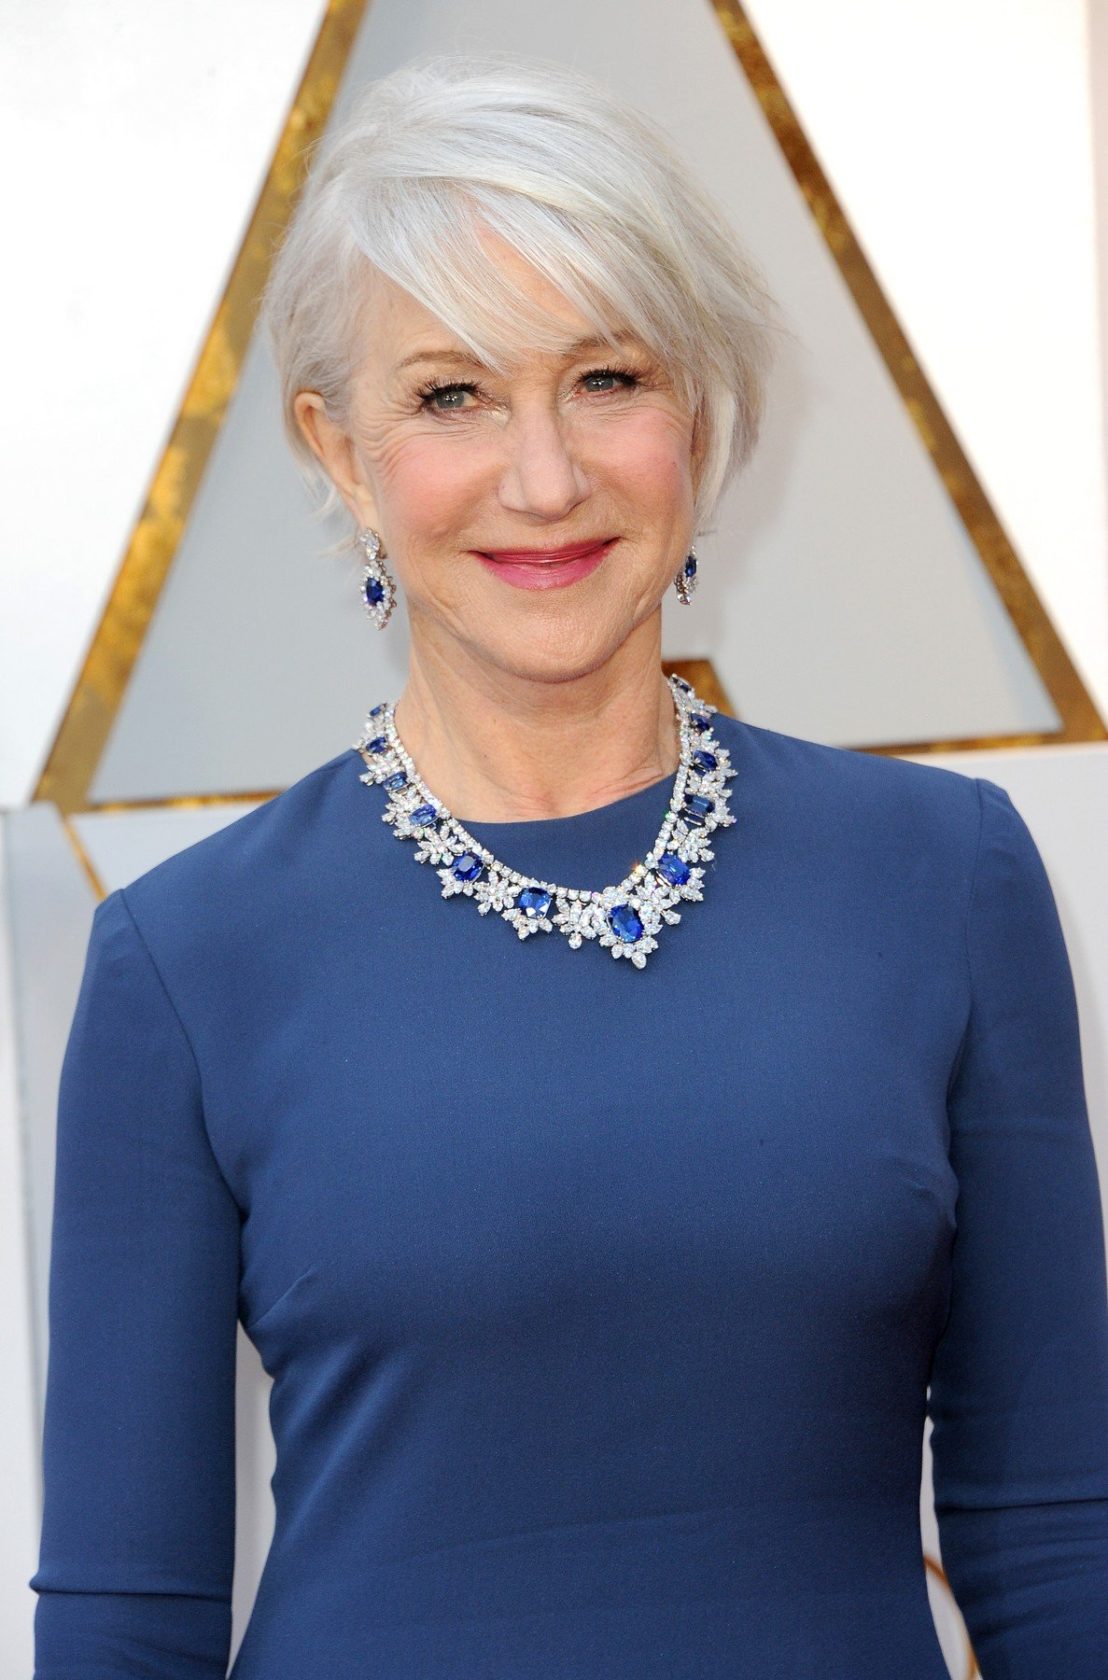 Helen Mirren at the 90th Annual Academy Awards held at the Dolby Theatre in Hollywood, USA on March 4, 2018., Image: 365132367, License: Rights-managed, Restrictions: NOT FOR SALE IN: USA., Model Release: no, Credit line: Profimedia, TEMP Camerapress